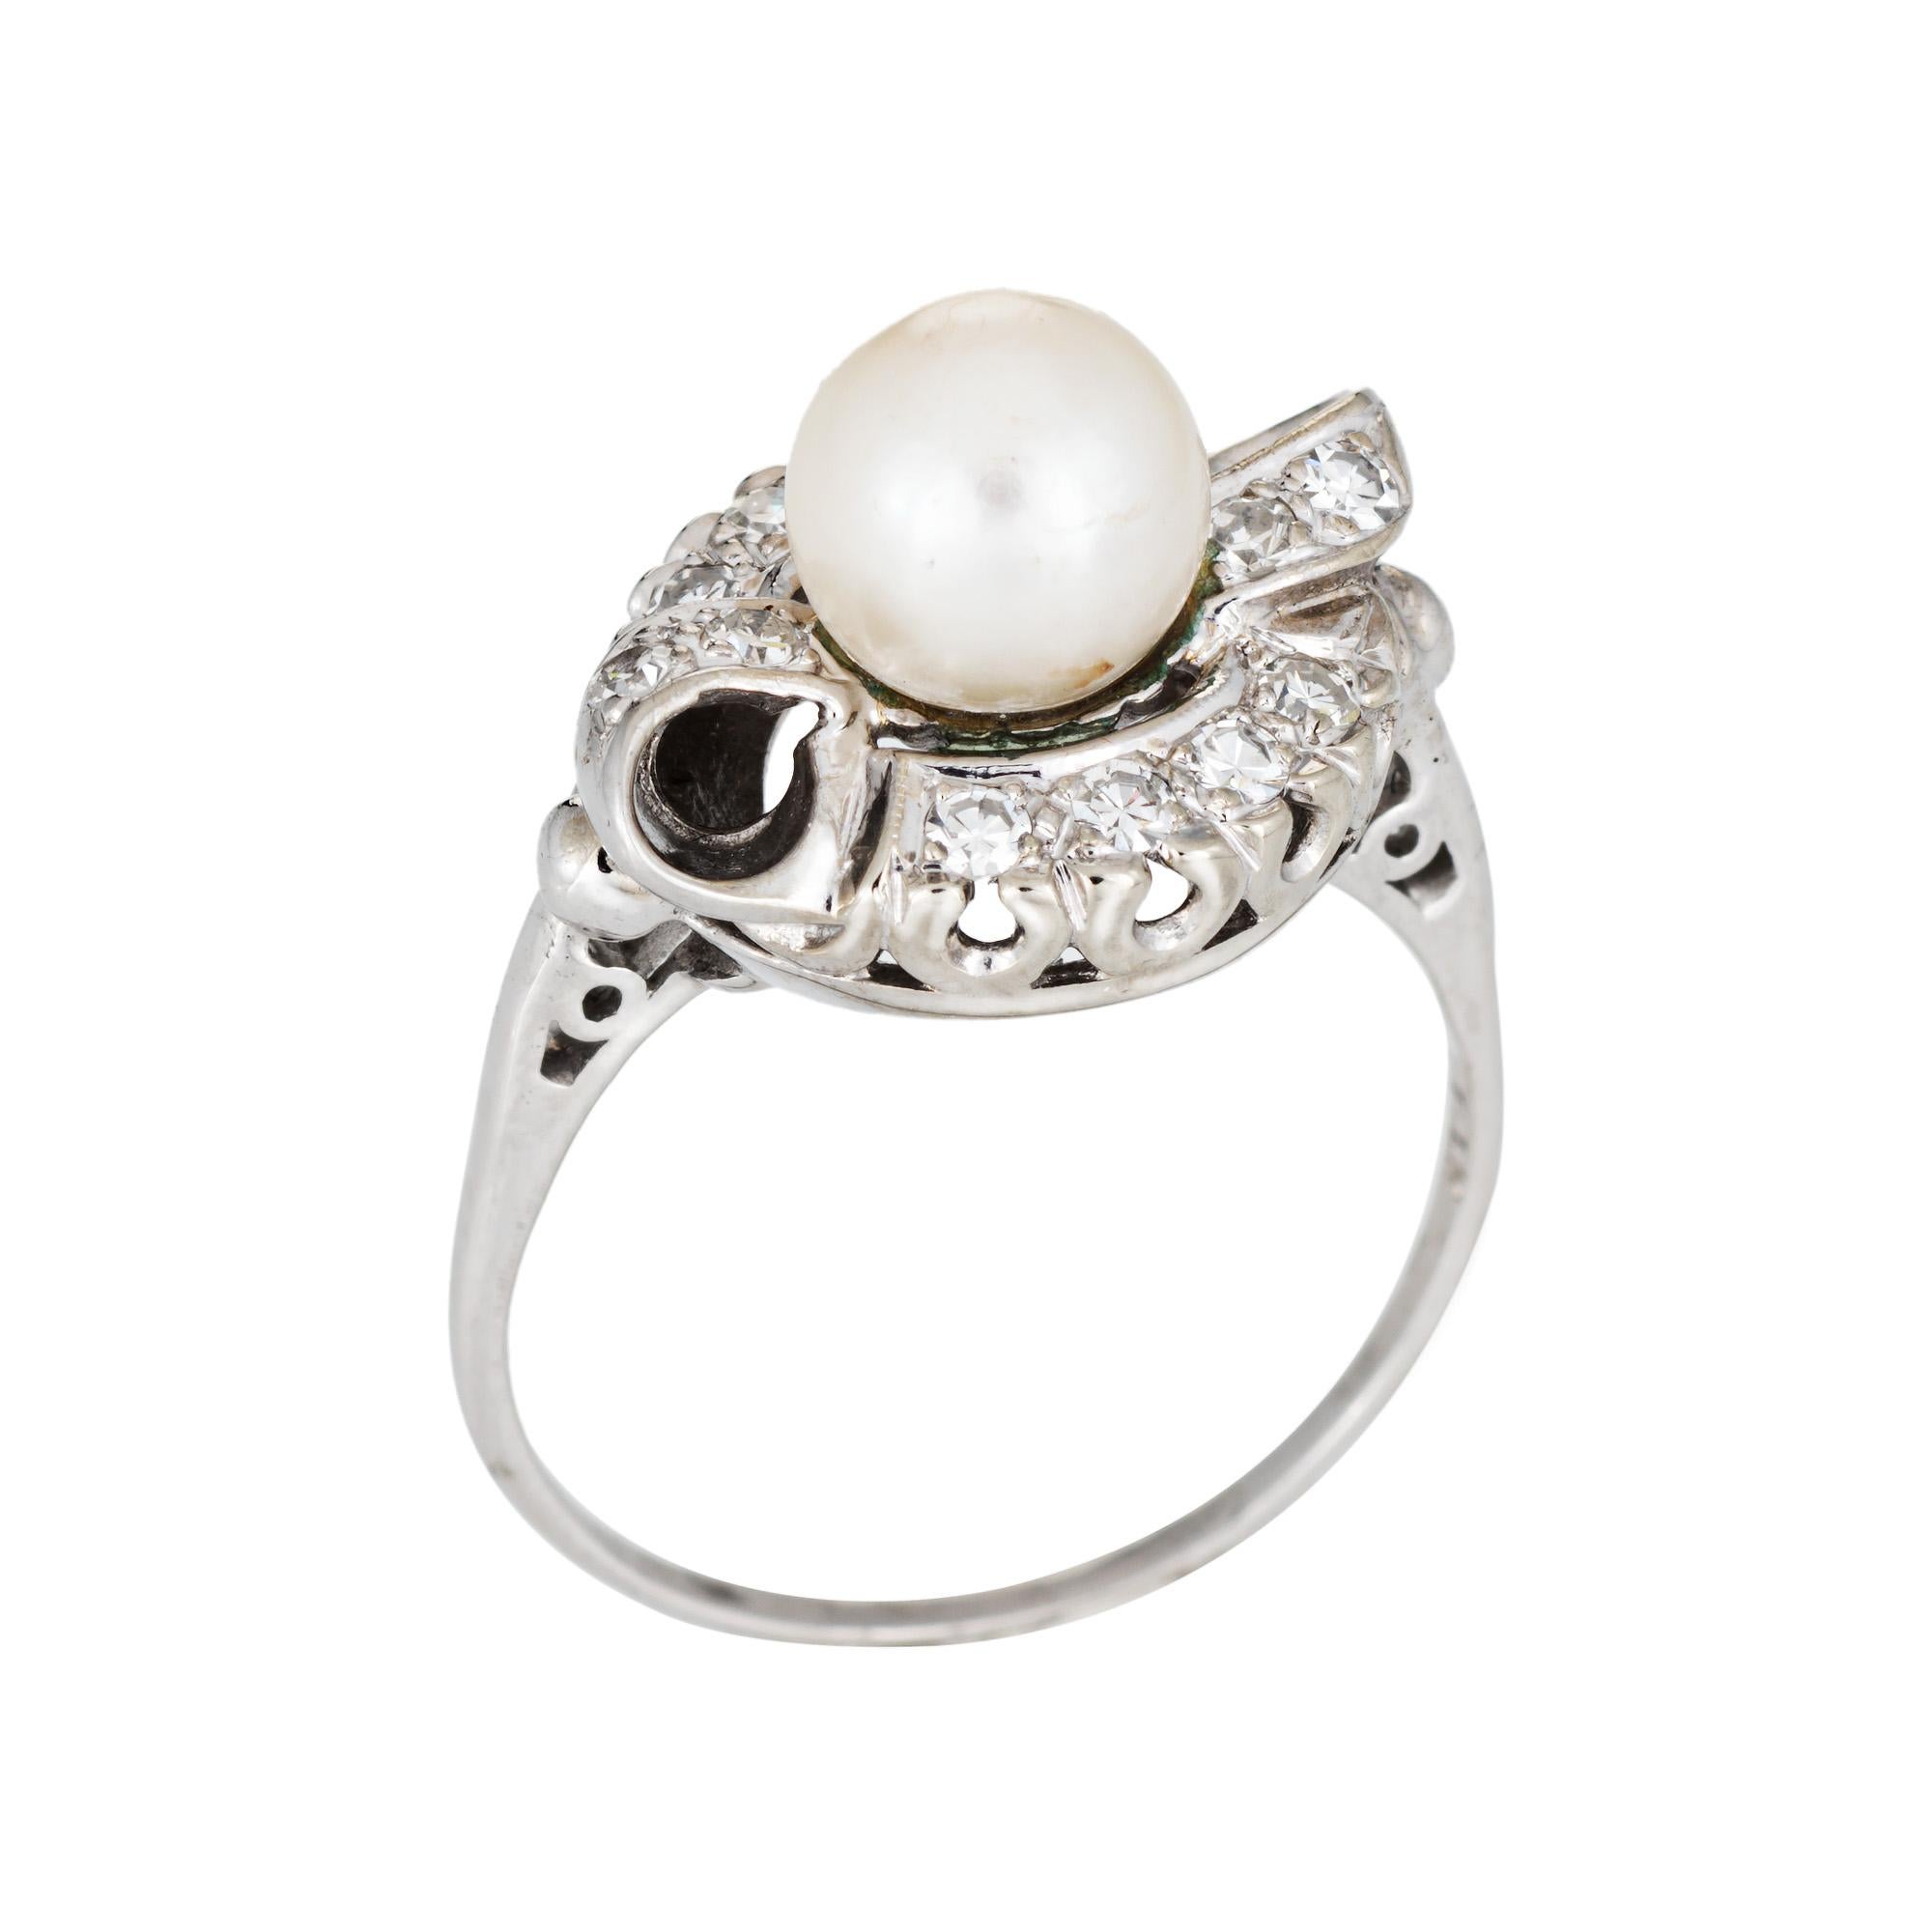 Stylish vintage cultured pearl & diamond ring crafted in 14 karat white gold (circa 1950s to 1960s). 

7mm cultured pearl is accented with an estimated 0.12 carats of single diamonds (estimated at H-I color and VS2-SI1 clarity.

The Mid-Century ring